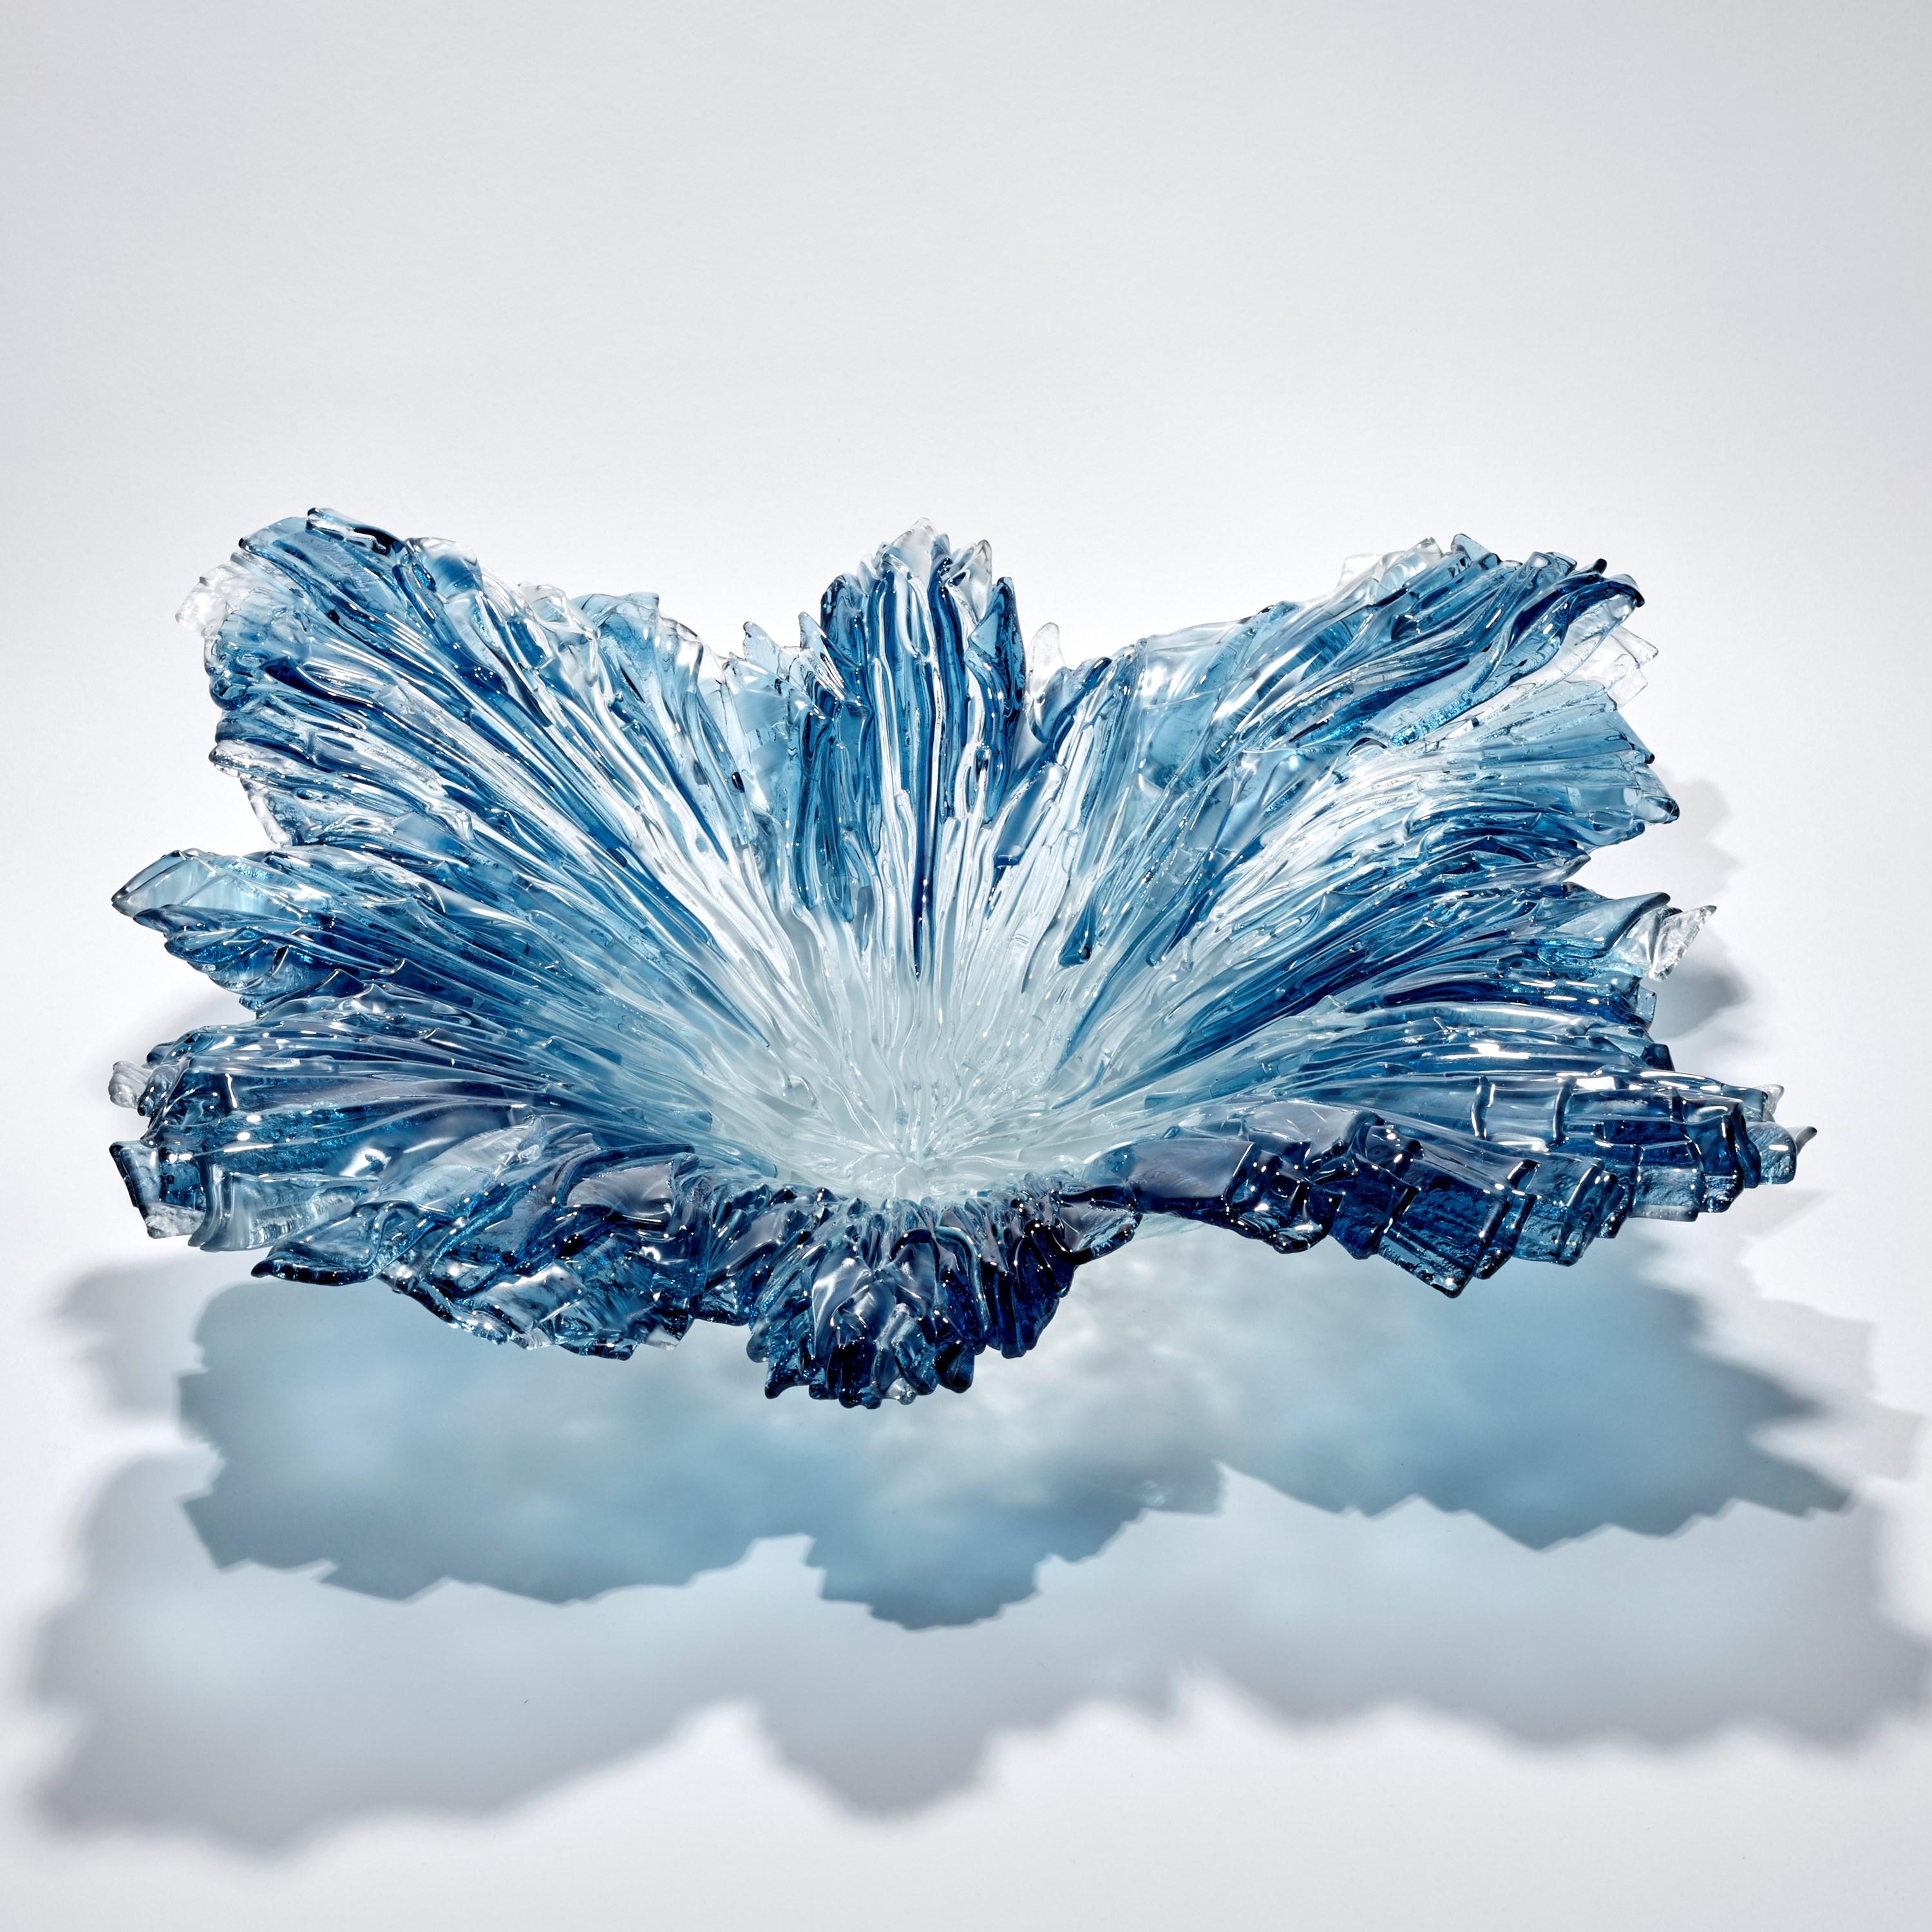 'Coral Bowl in Aqua' is a unique glass sculptural centrepiece by the British artist Wayne Charmer. 

For Wayne Charmer, the fascination of glass is to exploit its translucent and reflective qualities. Inspired by nature, his signature techniques